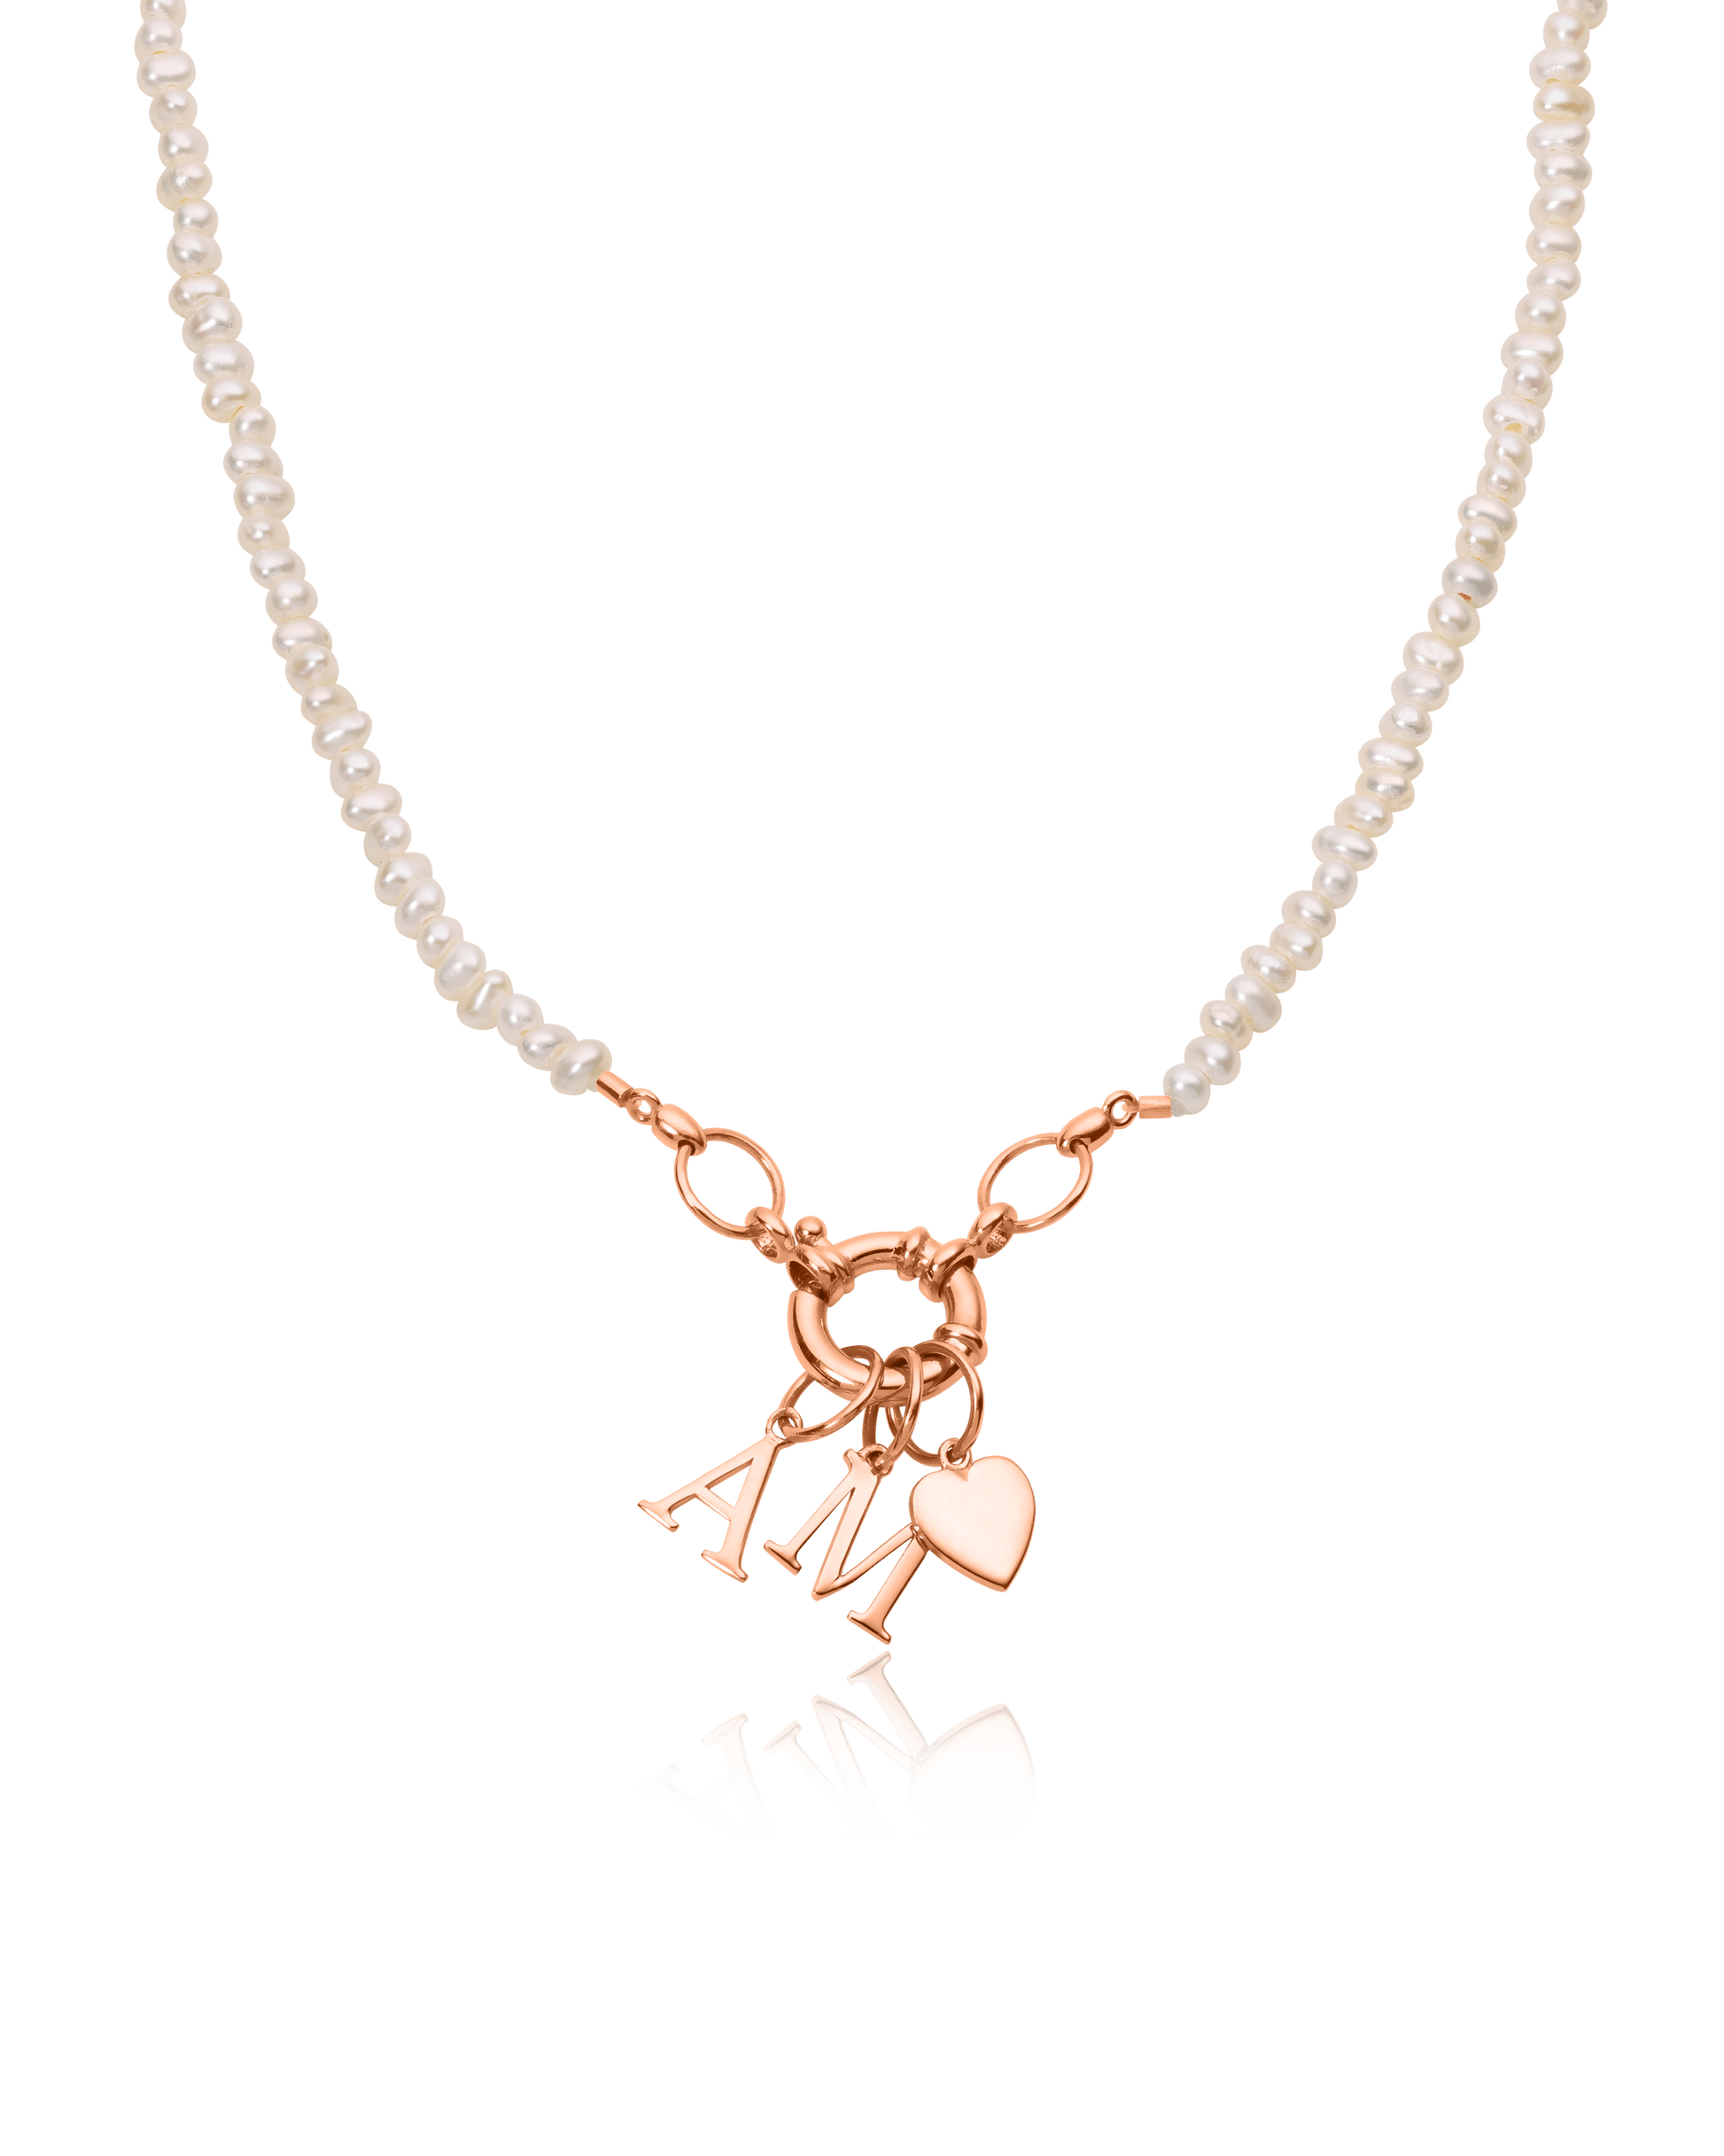 Pearl Charm Lock Necklace - 18K Rose Vermeil Necklaces magal-dev Pearl (OUT OF STOCK) 1 Charm 16"